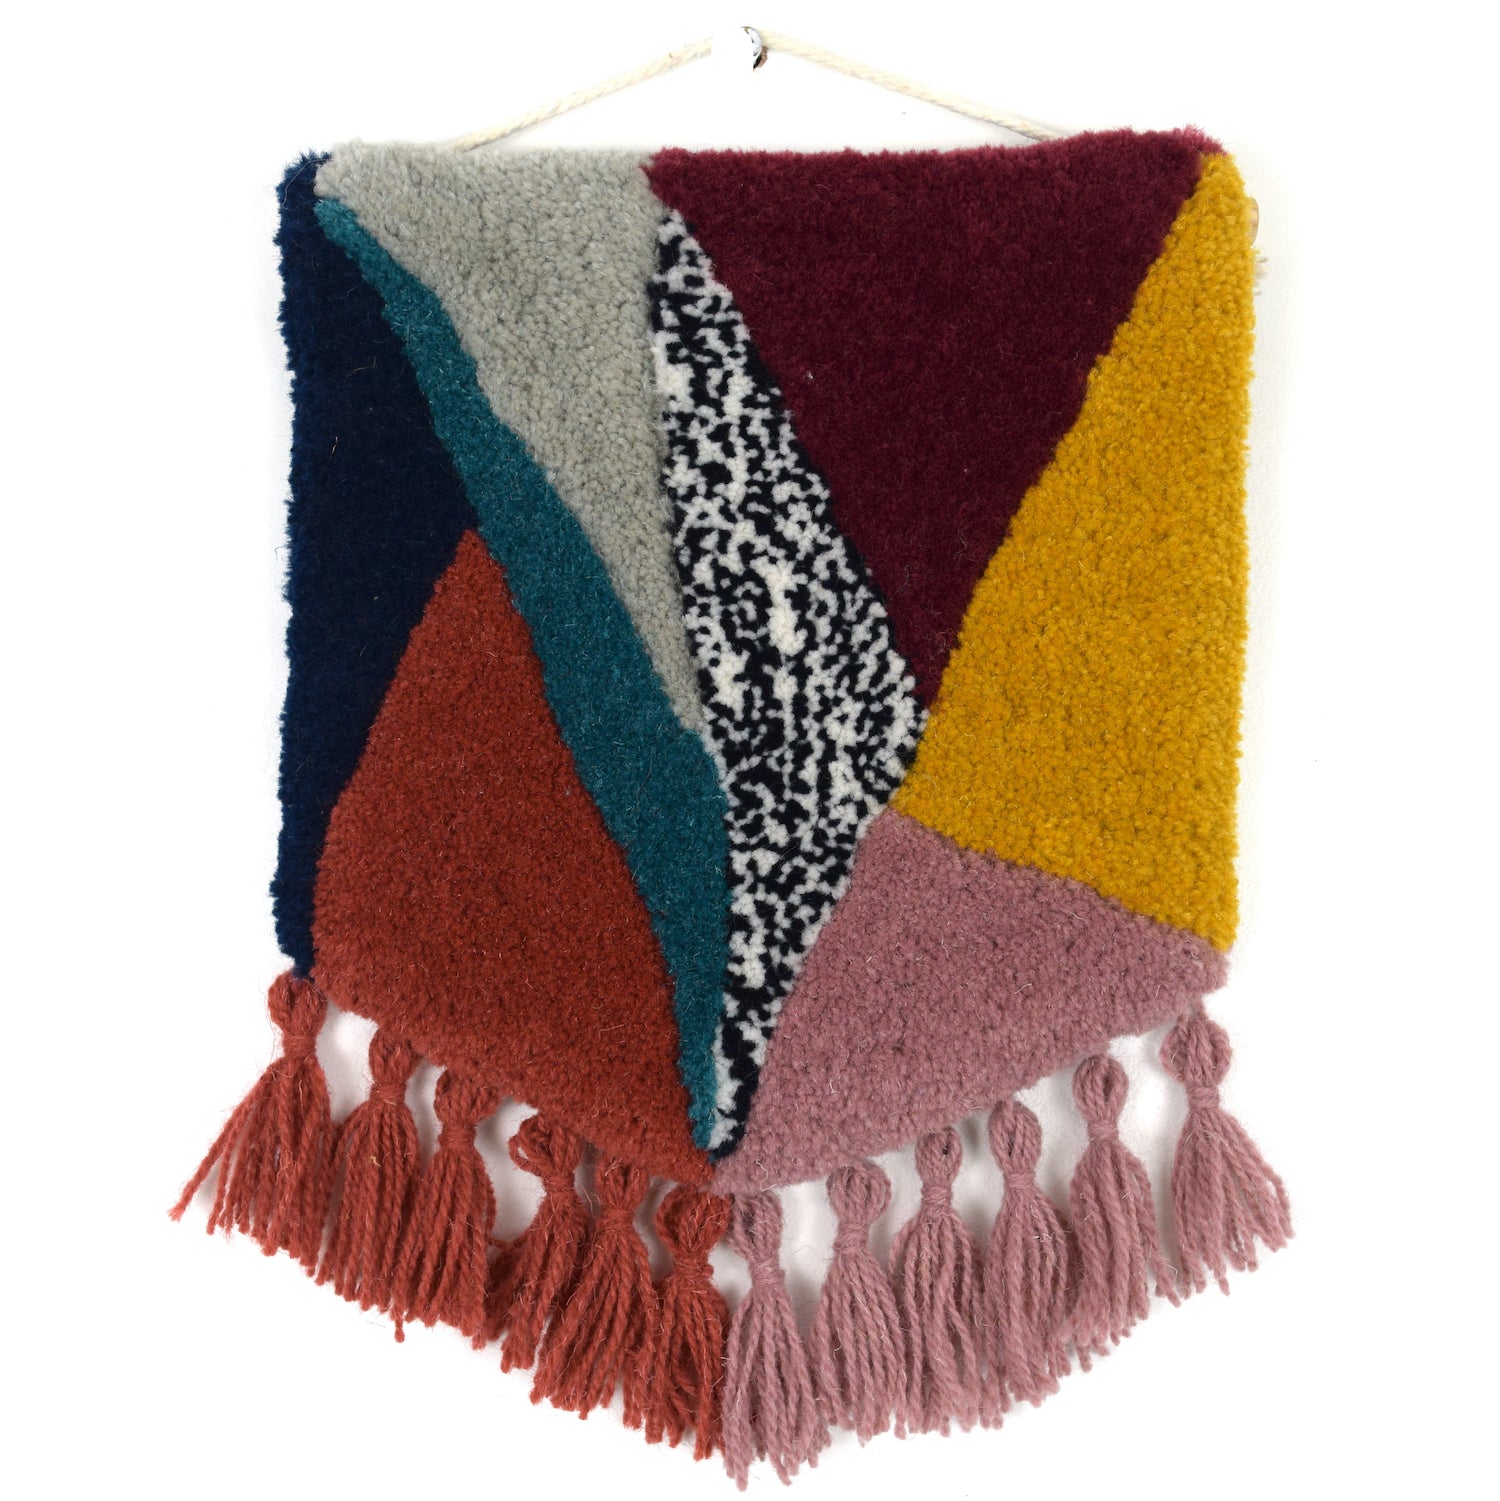 Triangular blocks of colour, the cut pile tuft carved in to pillowy shapes mixing complementary and contrasting Maroon, Coral, Khaki, Navy, Turquoise, Lilac, Mustard, dotted Black and White Reclaimed Yarn, with Coral and Lilac tassels.